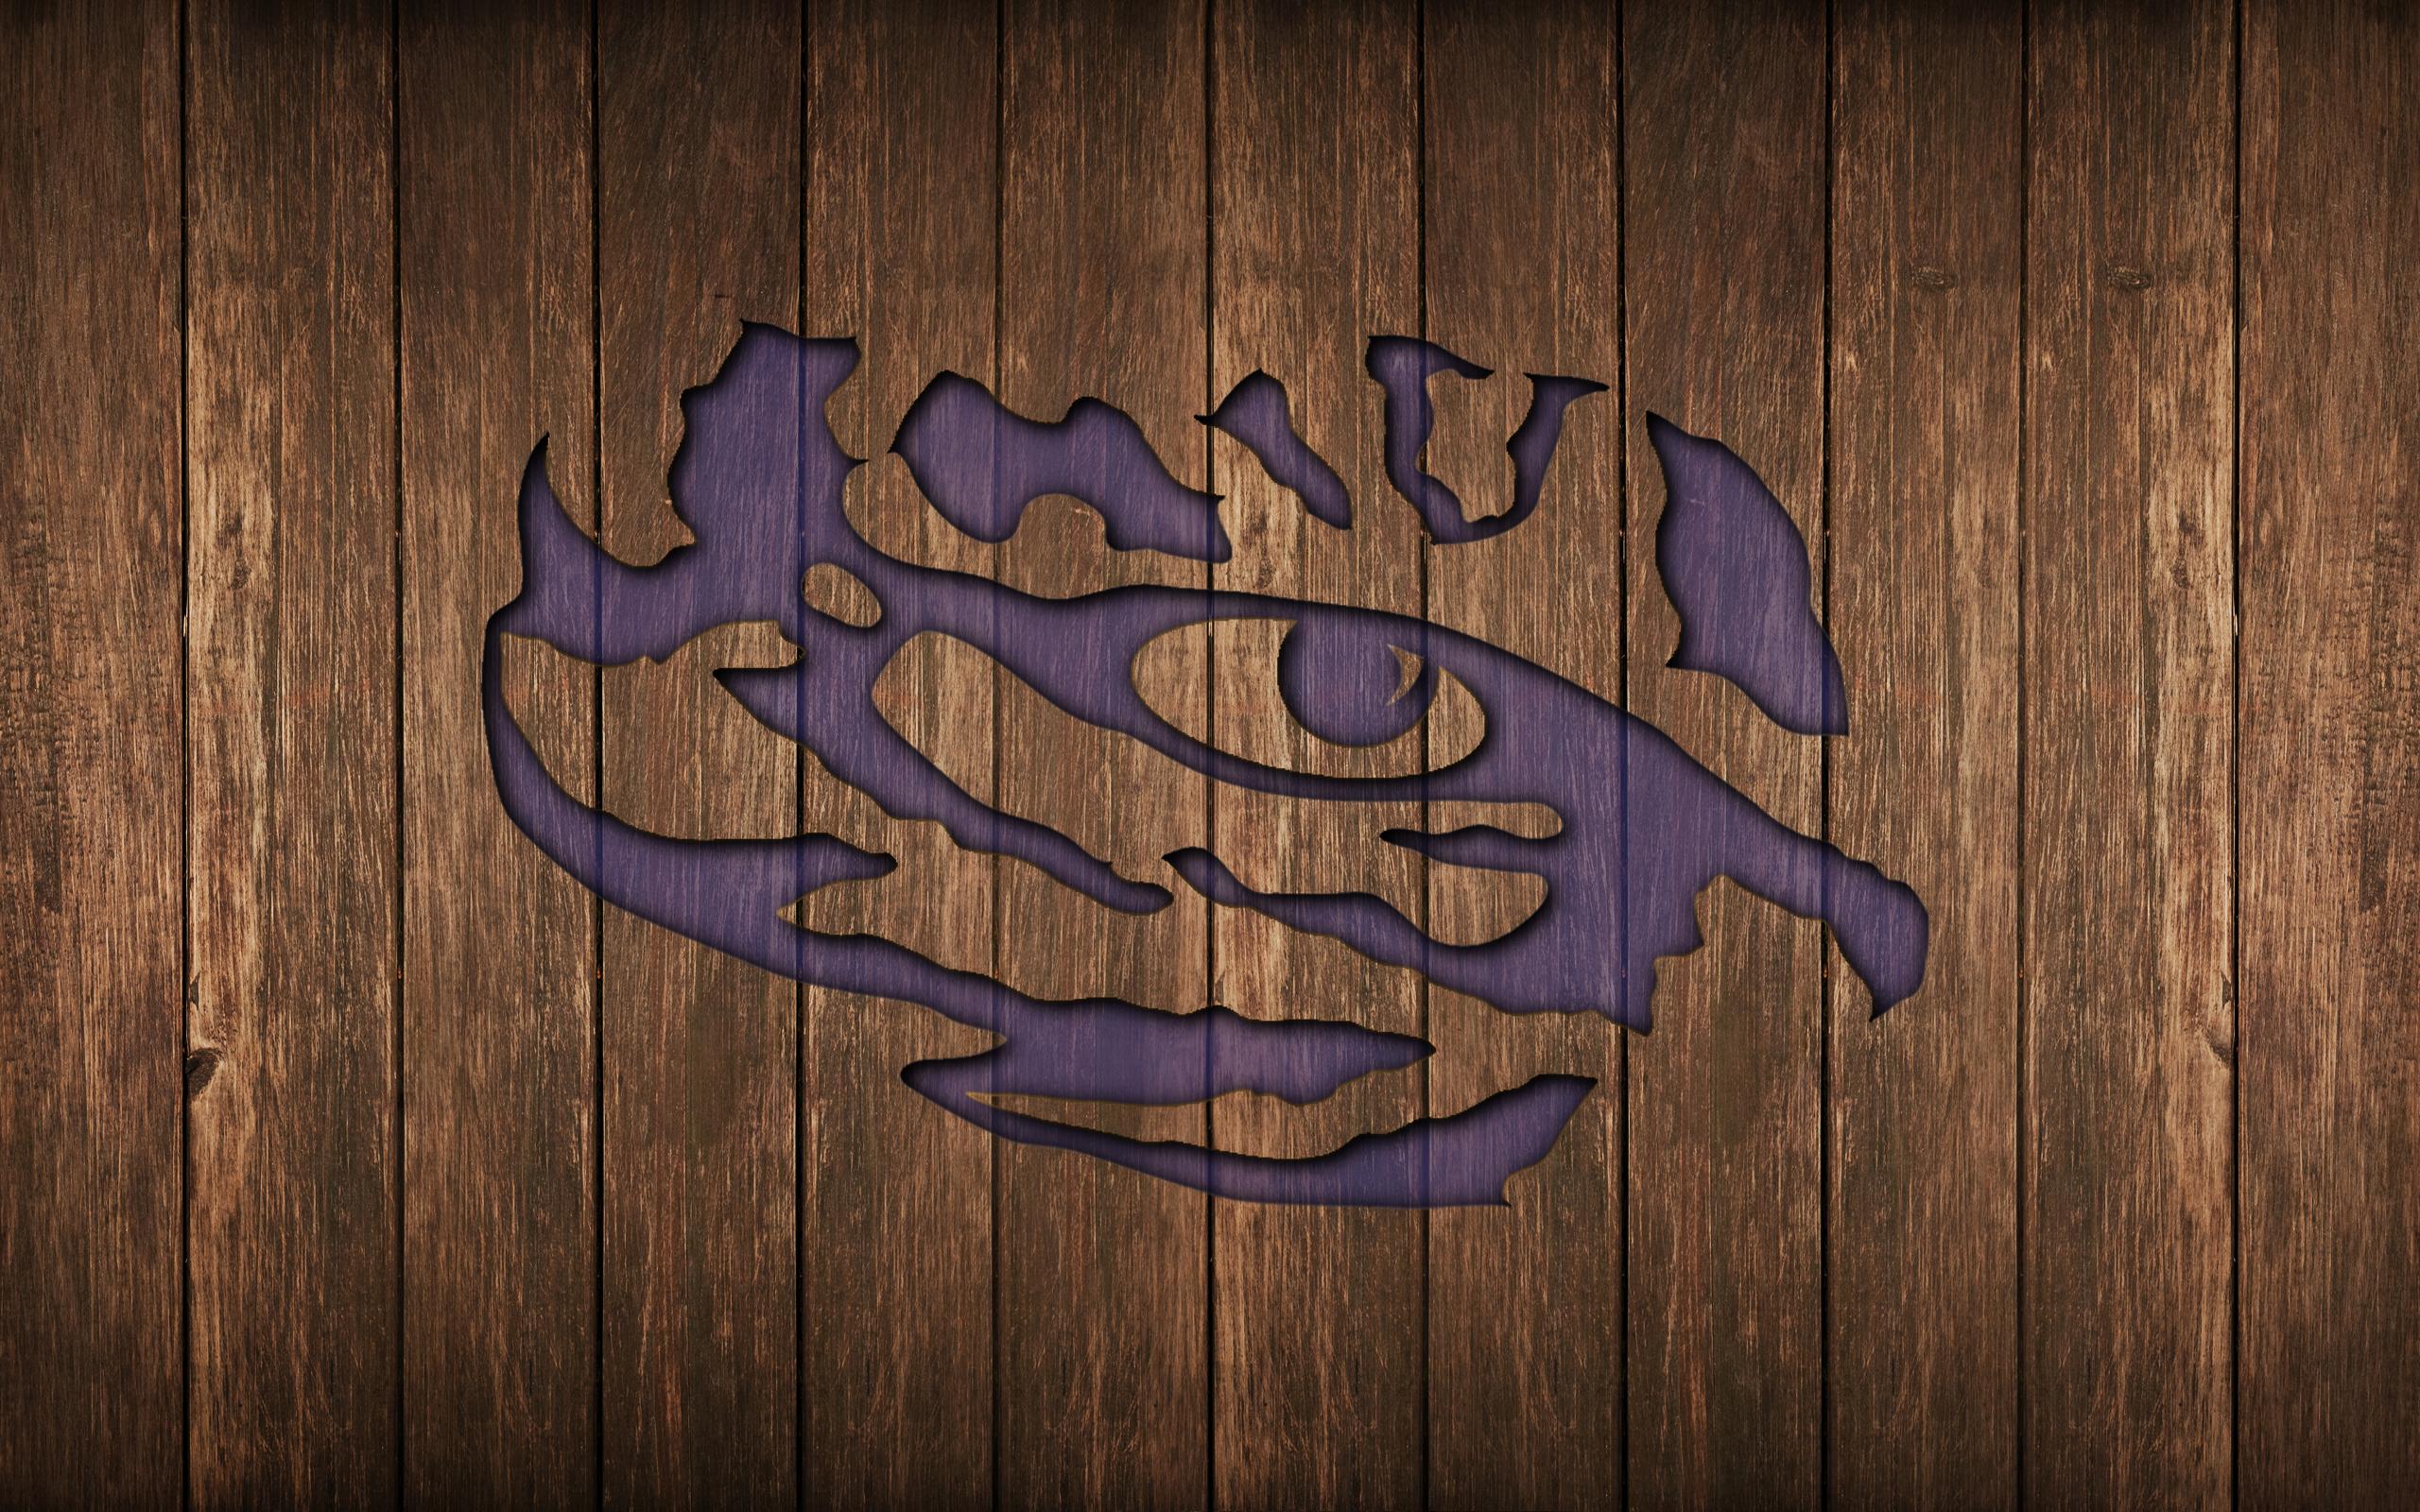 Some New Lsu Wallpaper I Have Been Working On